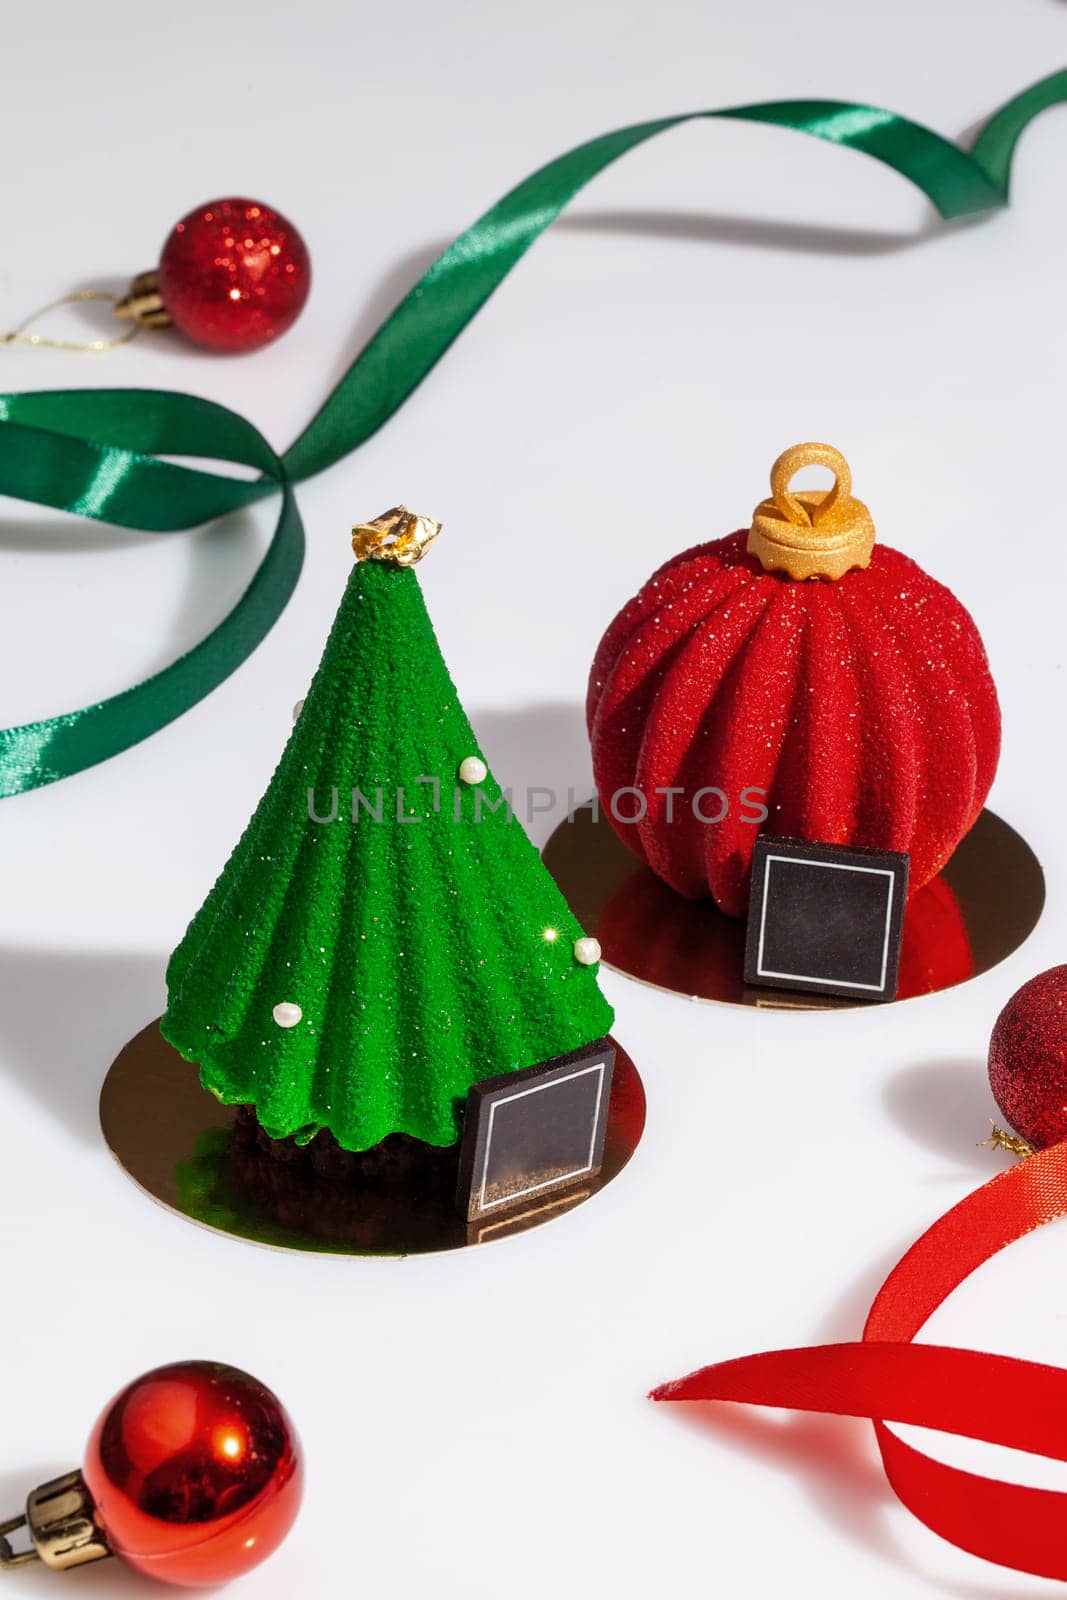 Holiday desserts in shape of green glazed fir and red ball surrounded by ribbons and Christmas tree toys on white background. Delicious treats for New Year celebration. Creating festive mood concept